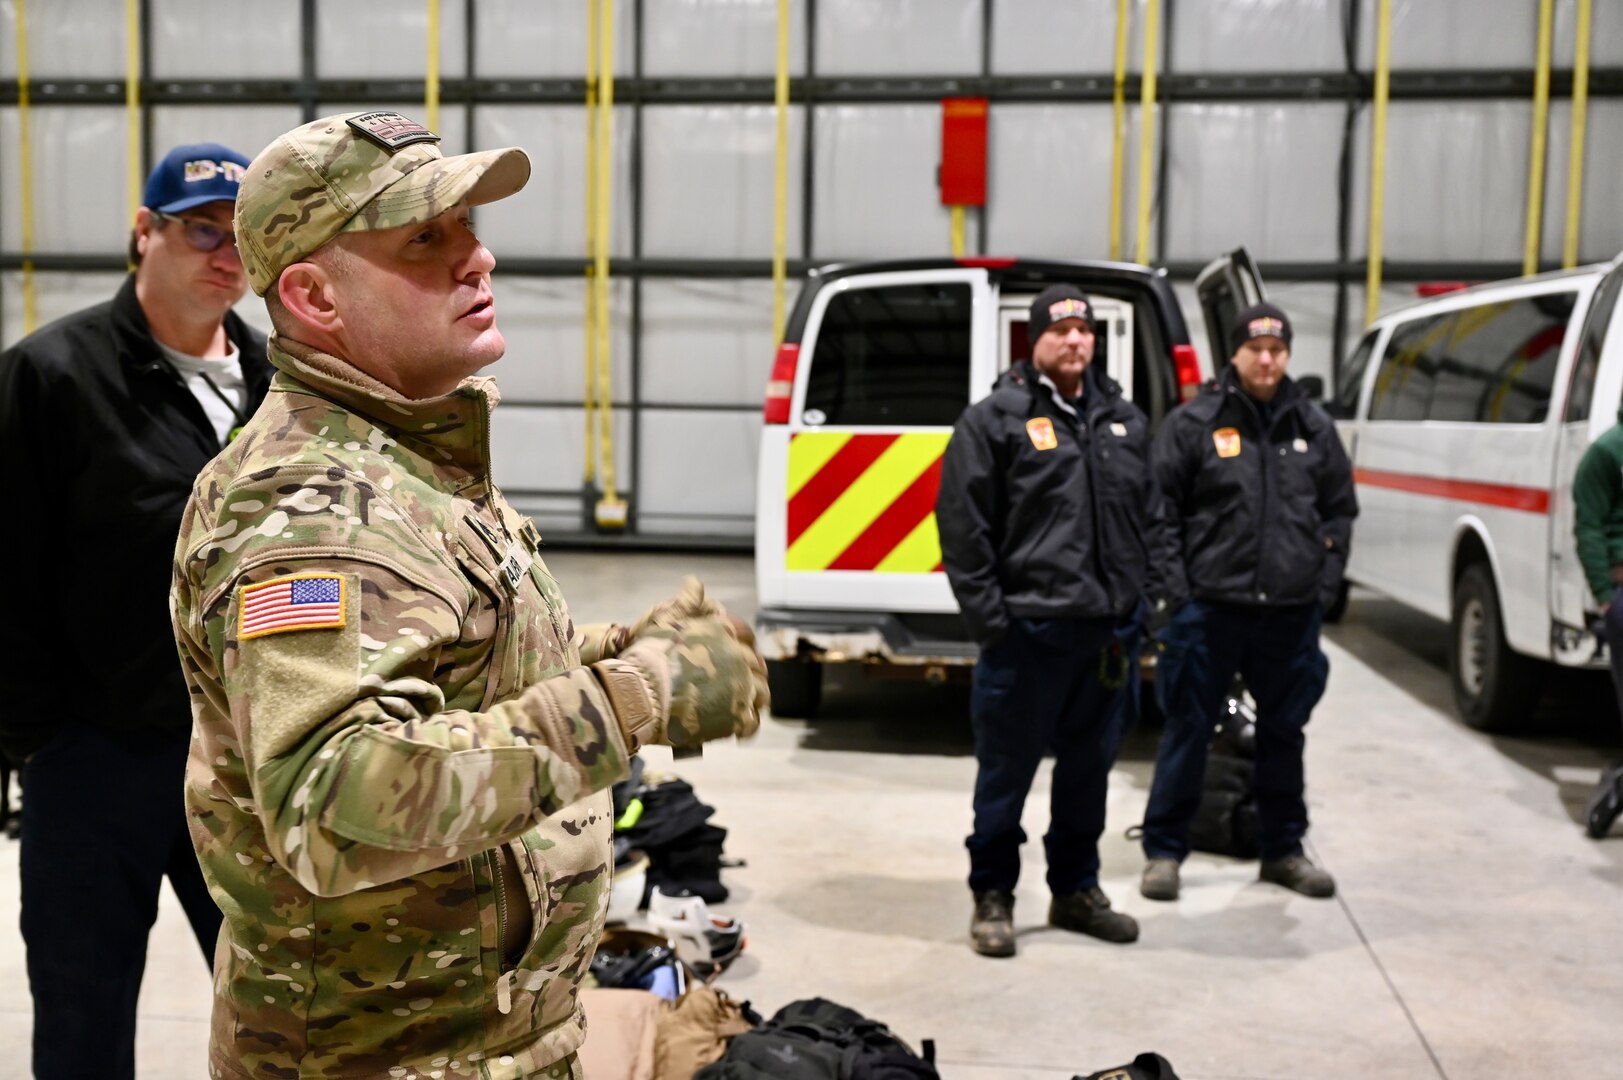 Maryland Task Force 1 (MD-TF1) and Virginia Task Force 1 (VA-TF1) of the Federal Emergency Management Agency (FMEA) train during an Urban Search and Rescue Task Force exercise, at Montgomery County Airpark and Public Safety Training Academy (PSTA), Feb. 15, 2024. The training represents a new partnership for members of the D.C. National Guard’s Aviation Detachment, nicknamed District Dustoff, designed to improve interoperability and familiarity between partners involved in disaster response in the DMV.